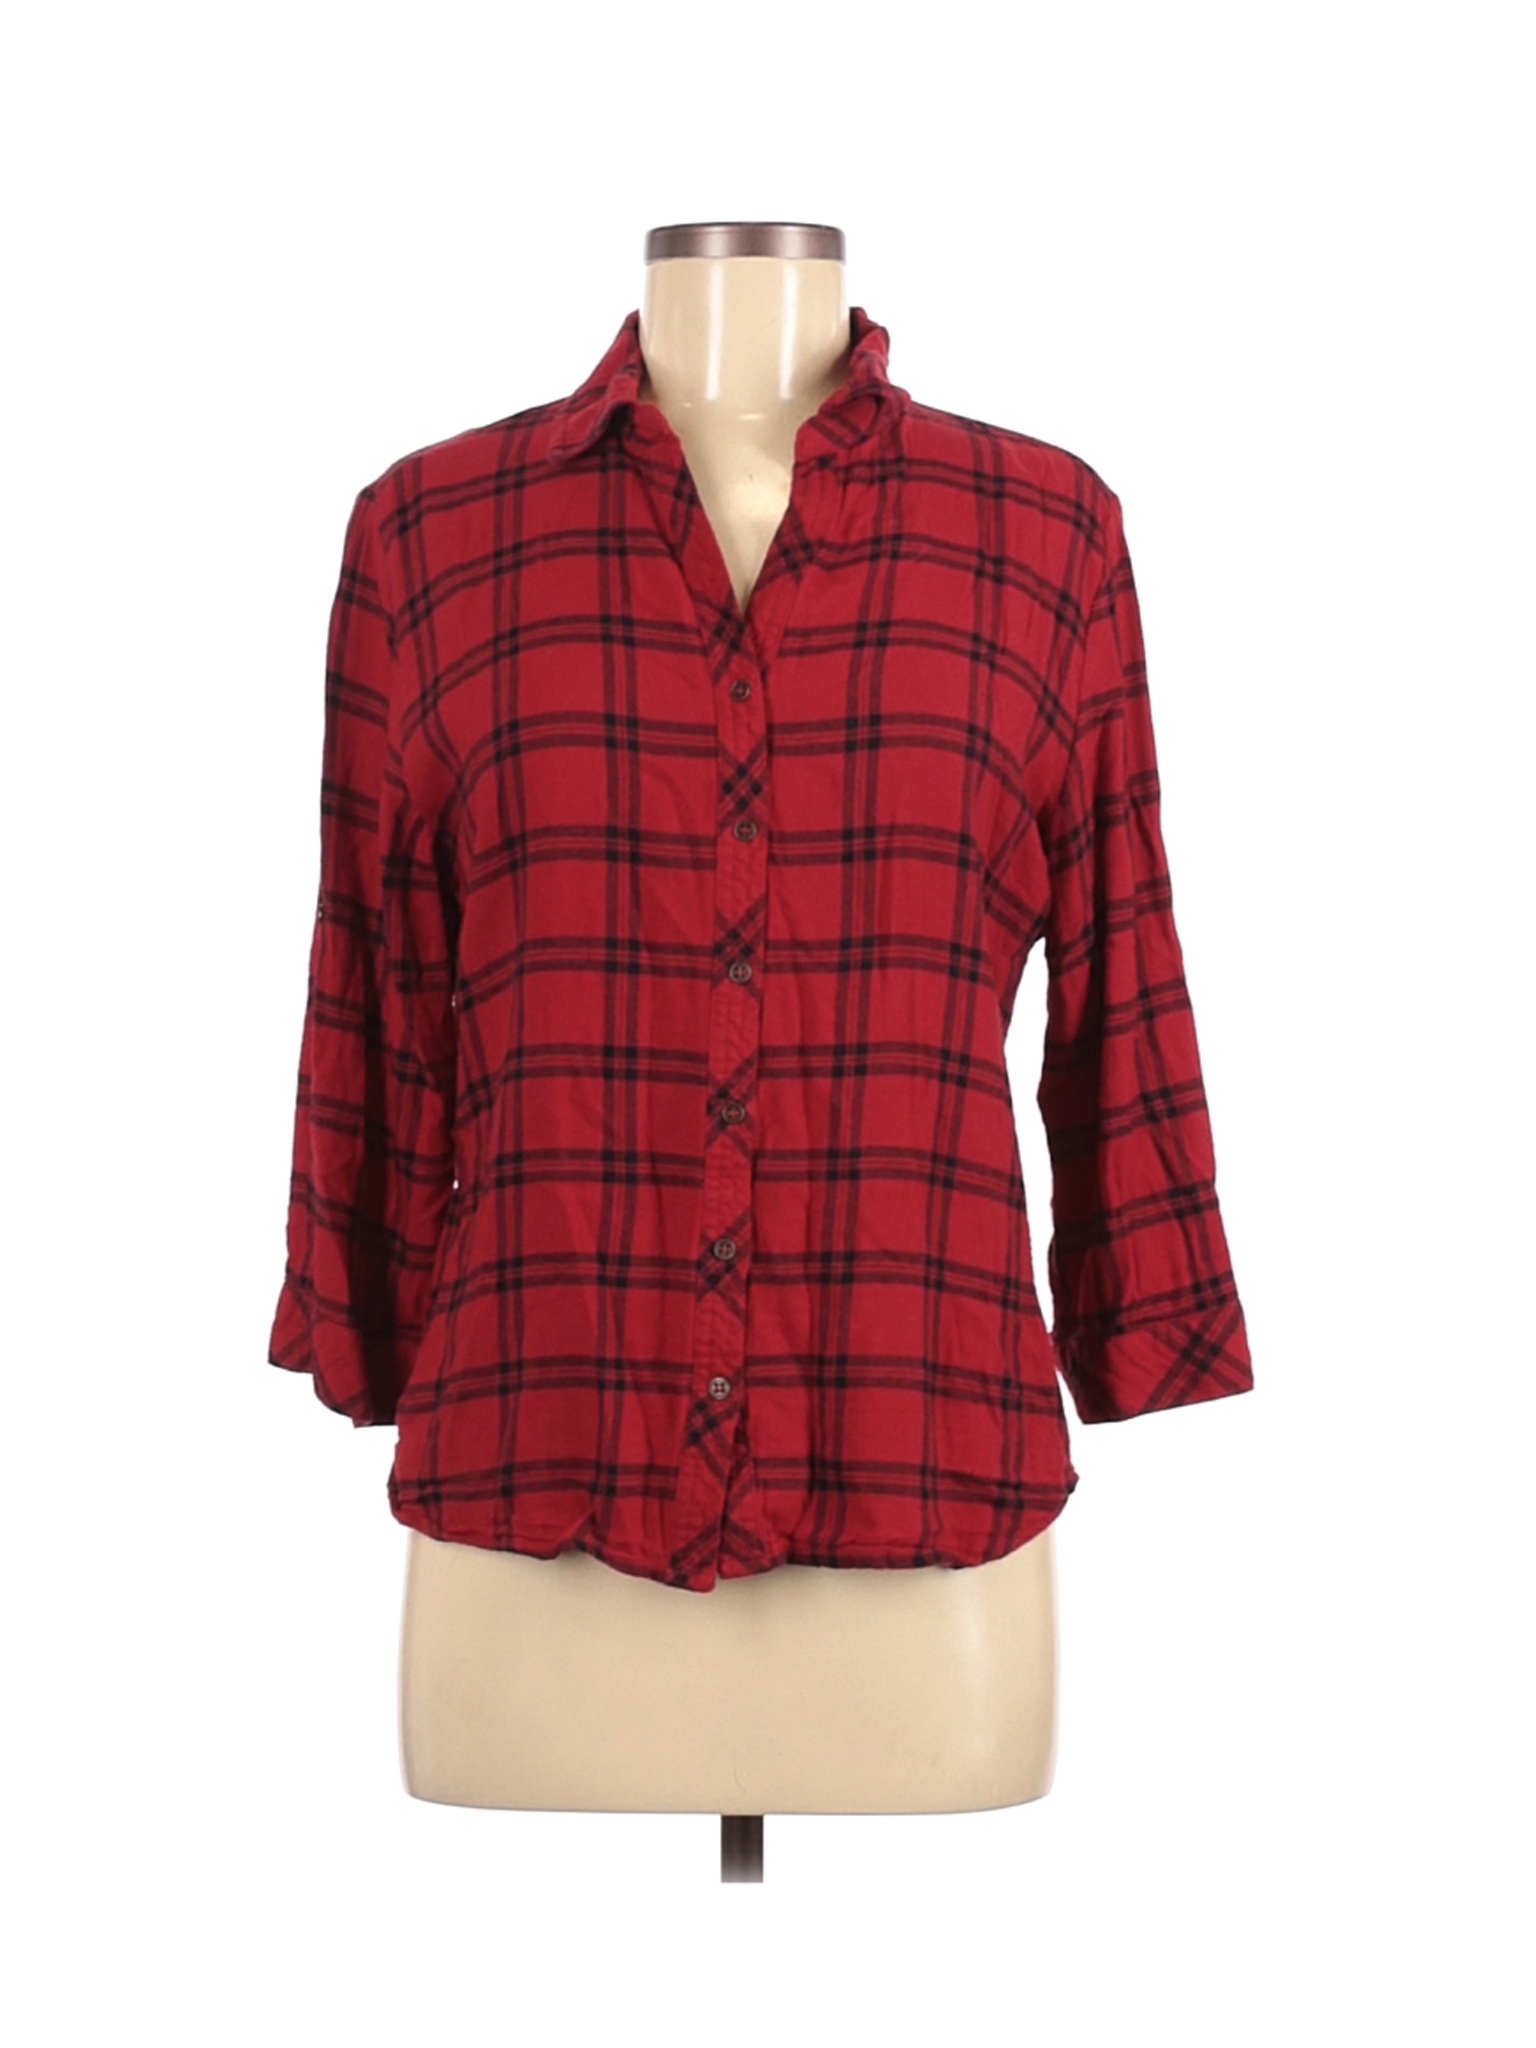 Hester & Orchard Women Red 3/4 Sleeve Button-Down Shirt M | eBay